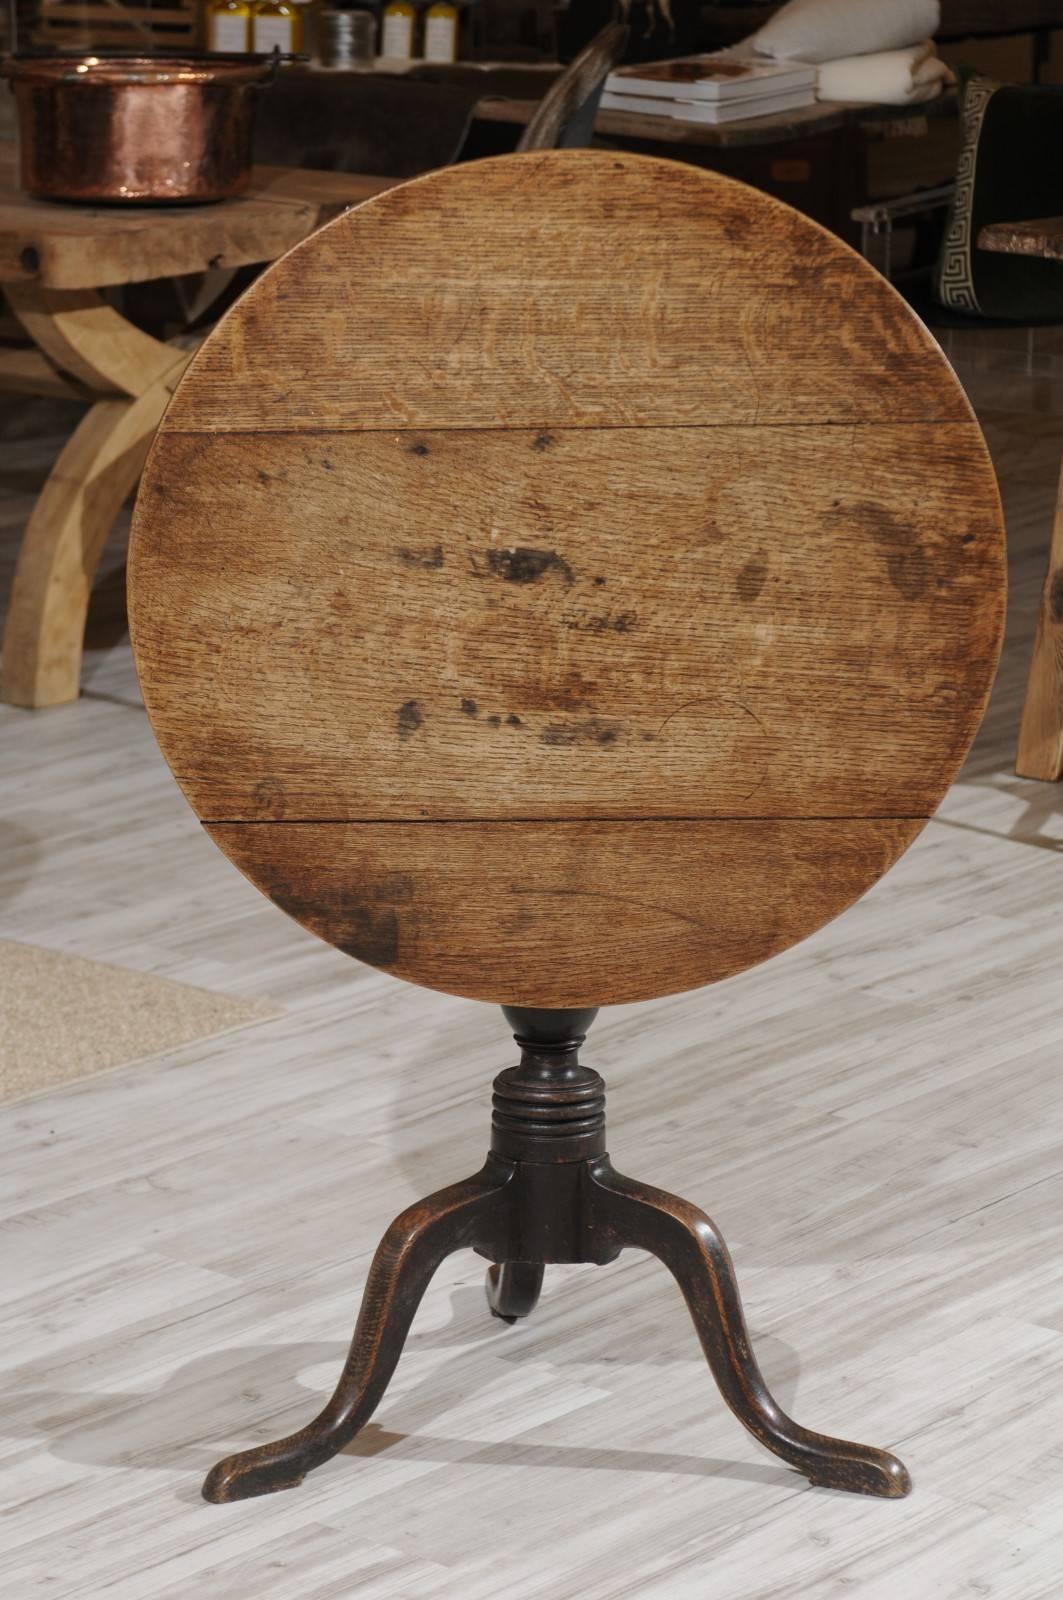 A 19th century French oakwood rustic guéridon table with circular tilt top, raised on a turned pedestal with tripod base. We loved the patina of this French rustic guéridon table, a 19th century oak folding table that looks as functional in its